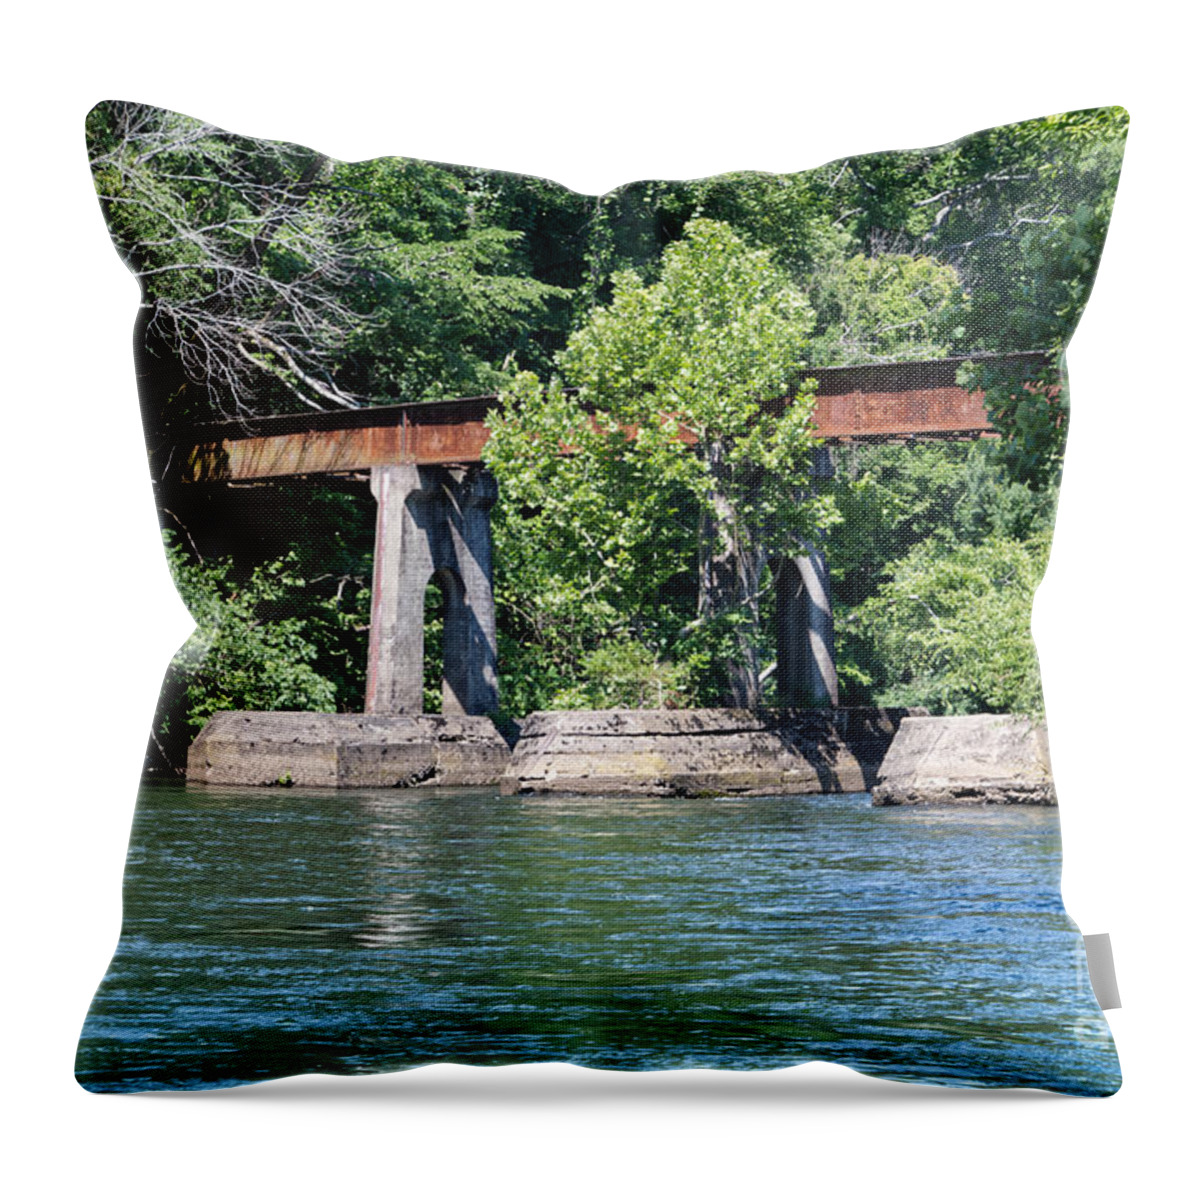 Ocoee Dam Throw Pillow featuring the photograph Sugarloaf Mountain Park 1 by Phil Perkins